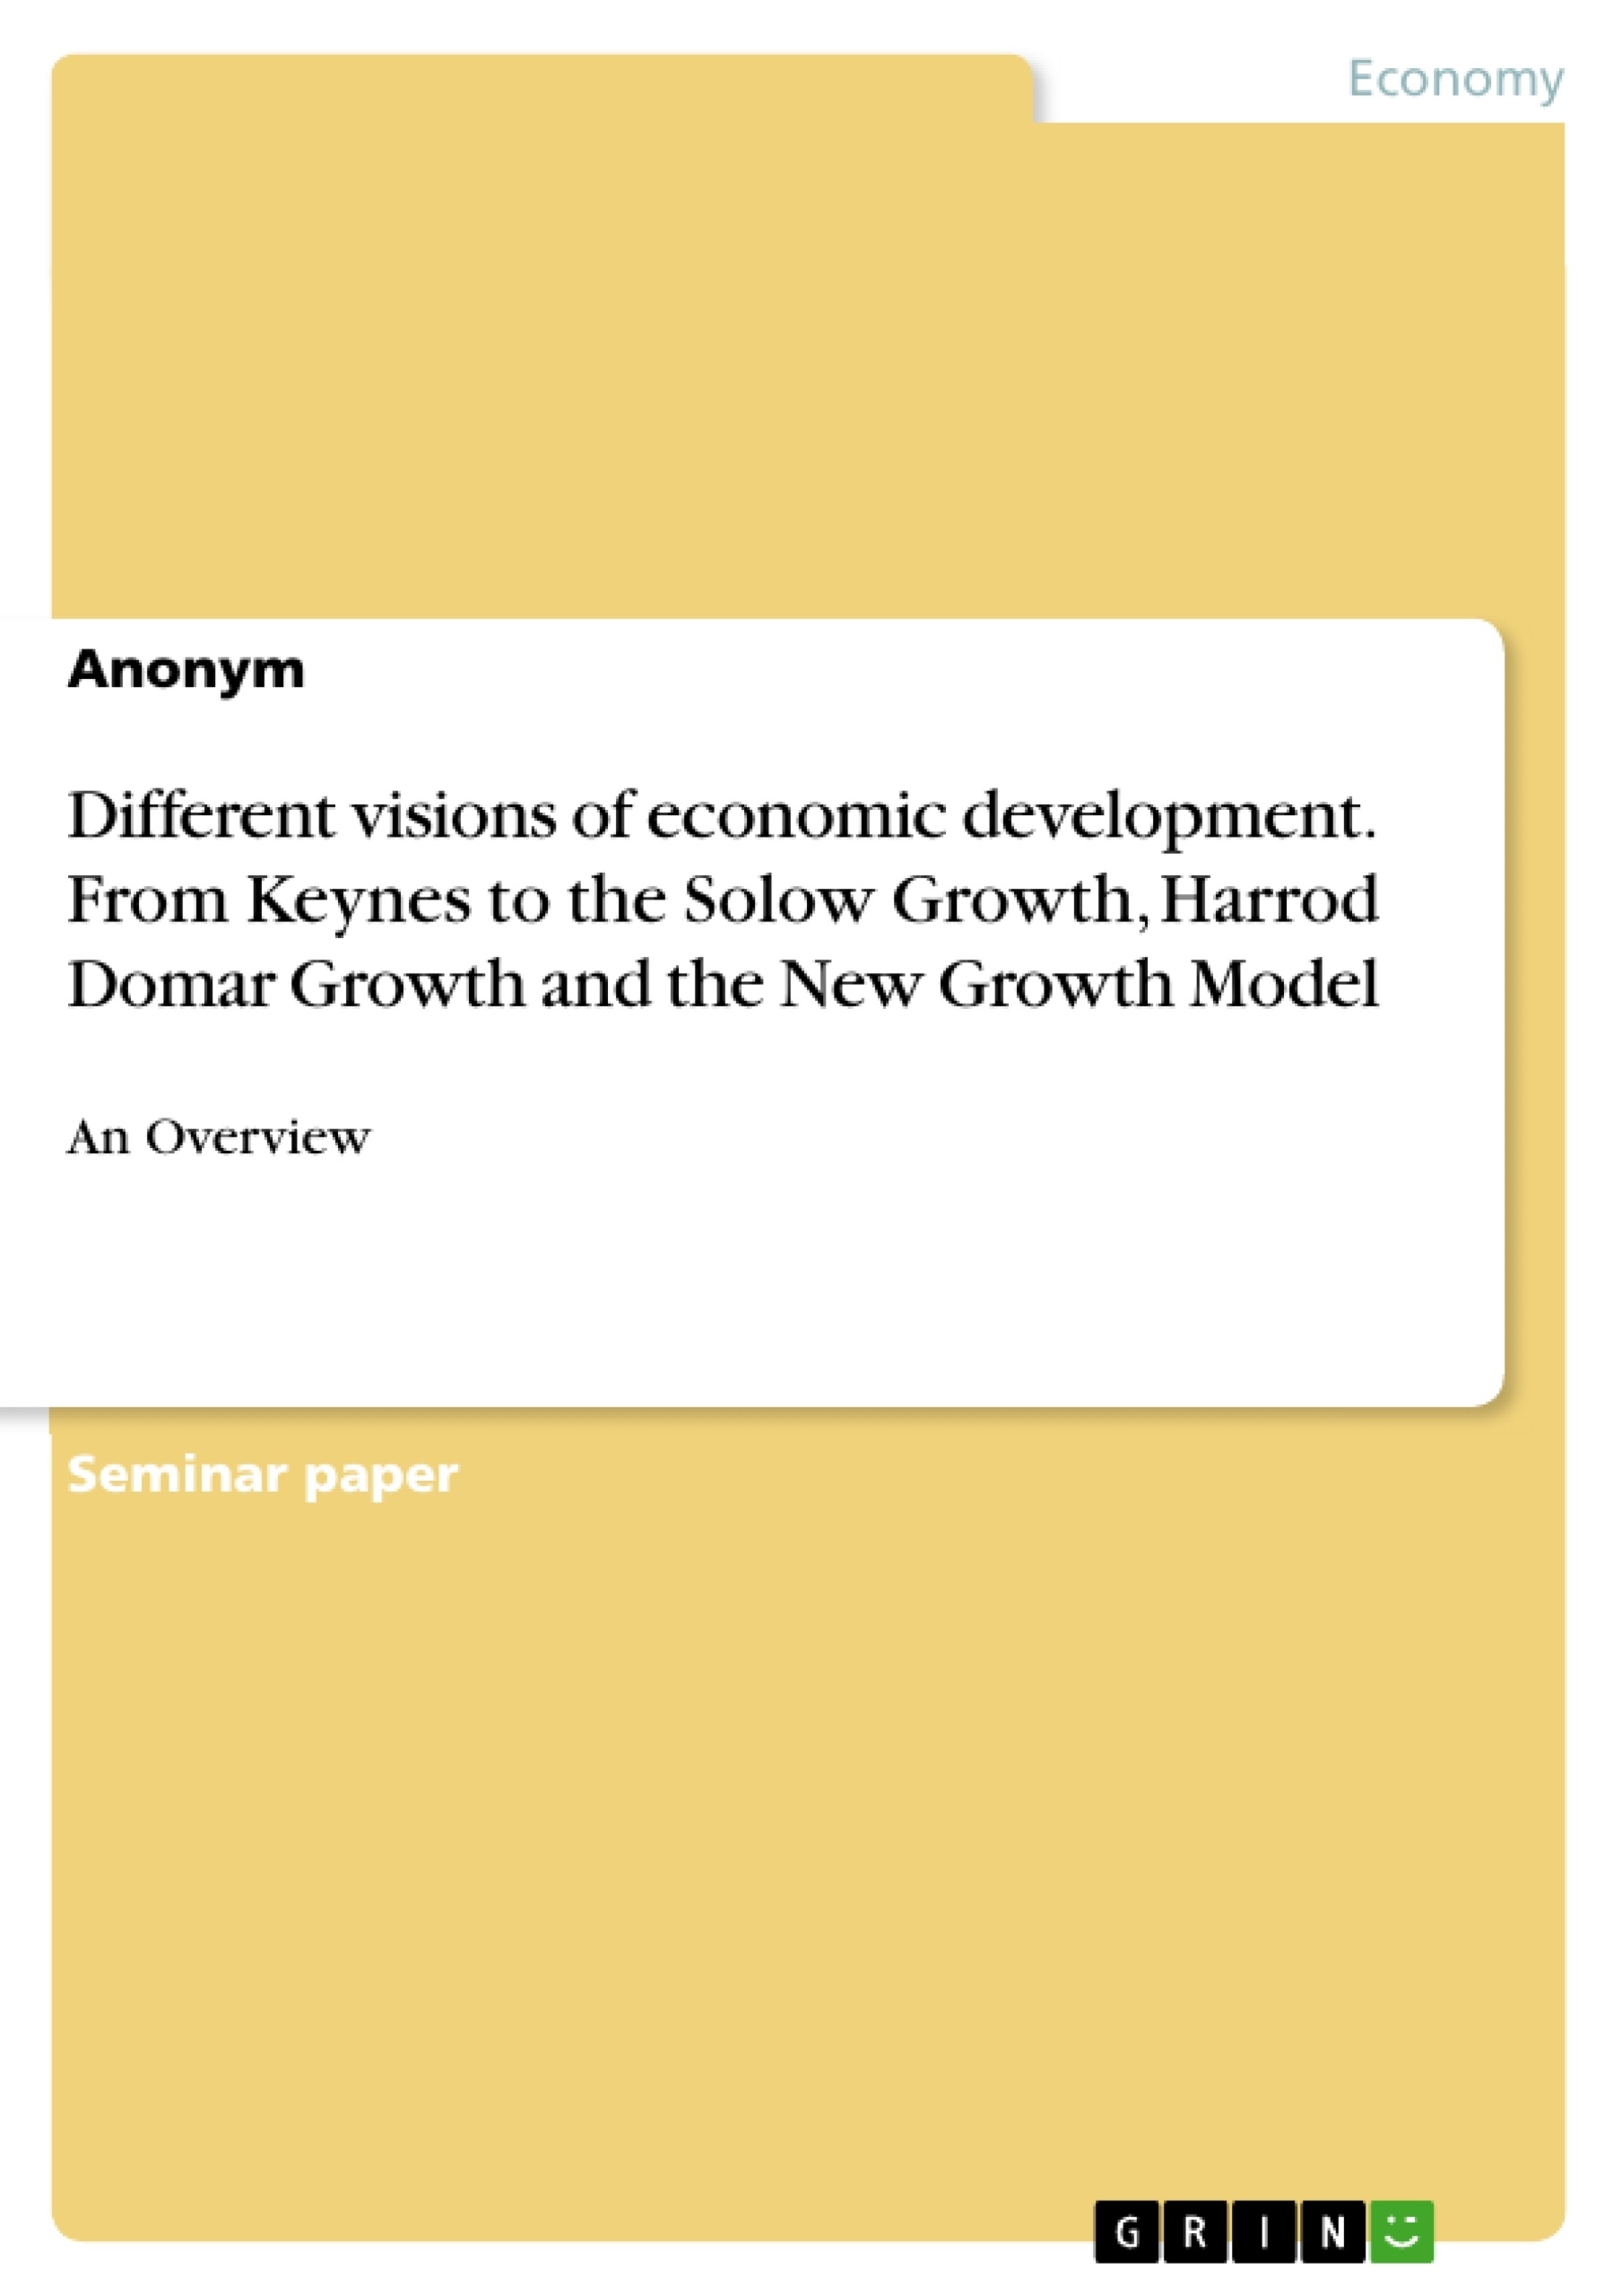 Titre: Different visions of economic development. From Keynes to the Solow Growth, Harrod Domar Growth and the New Growth Model